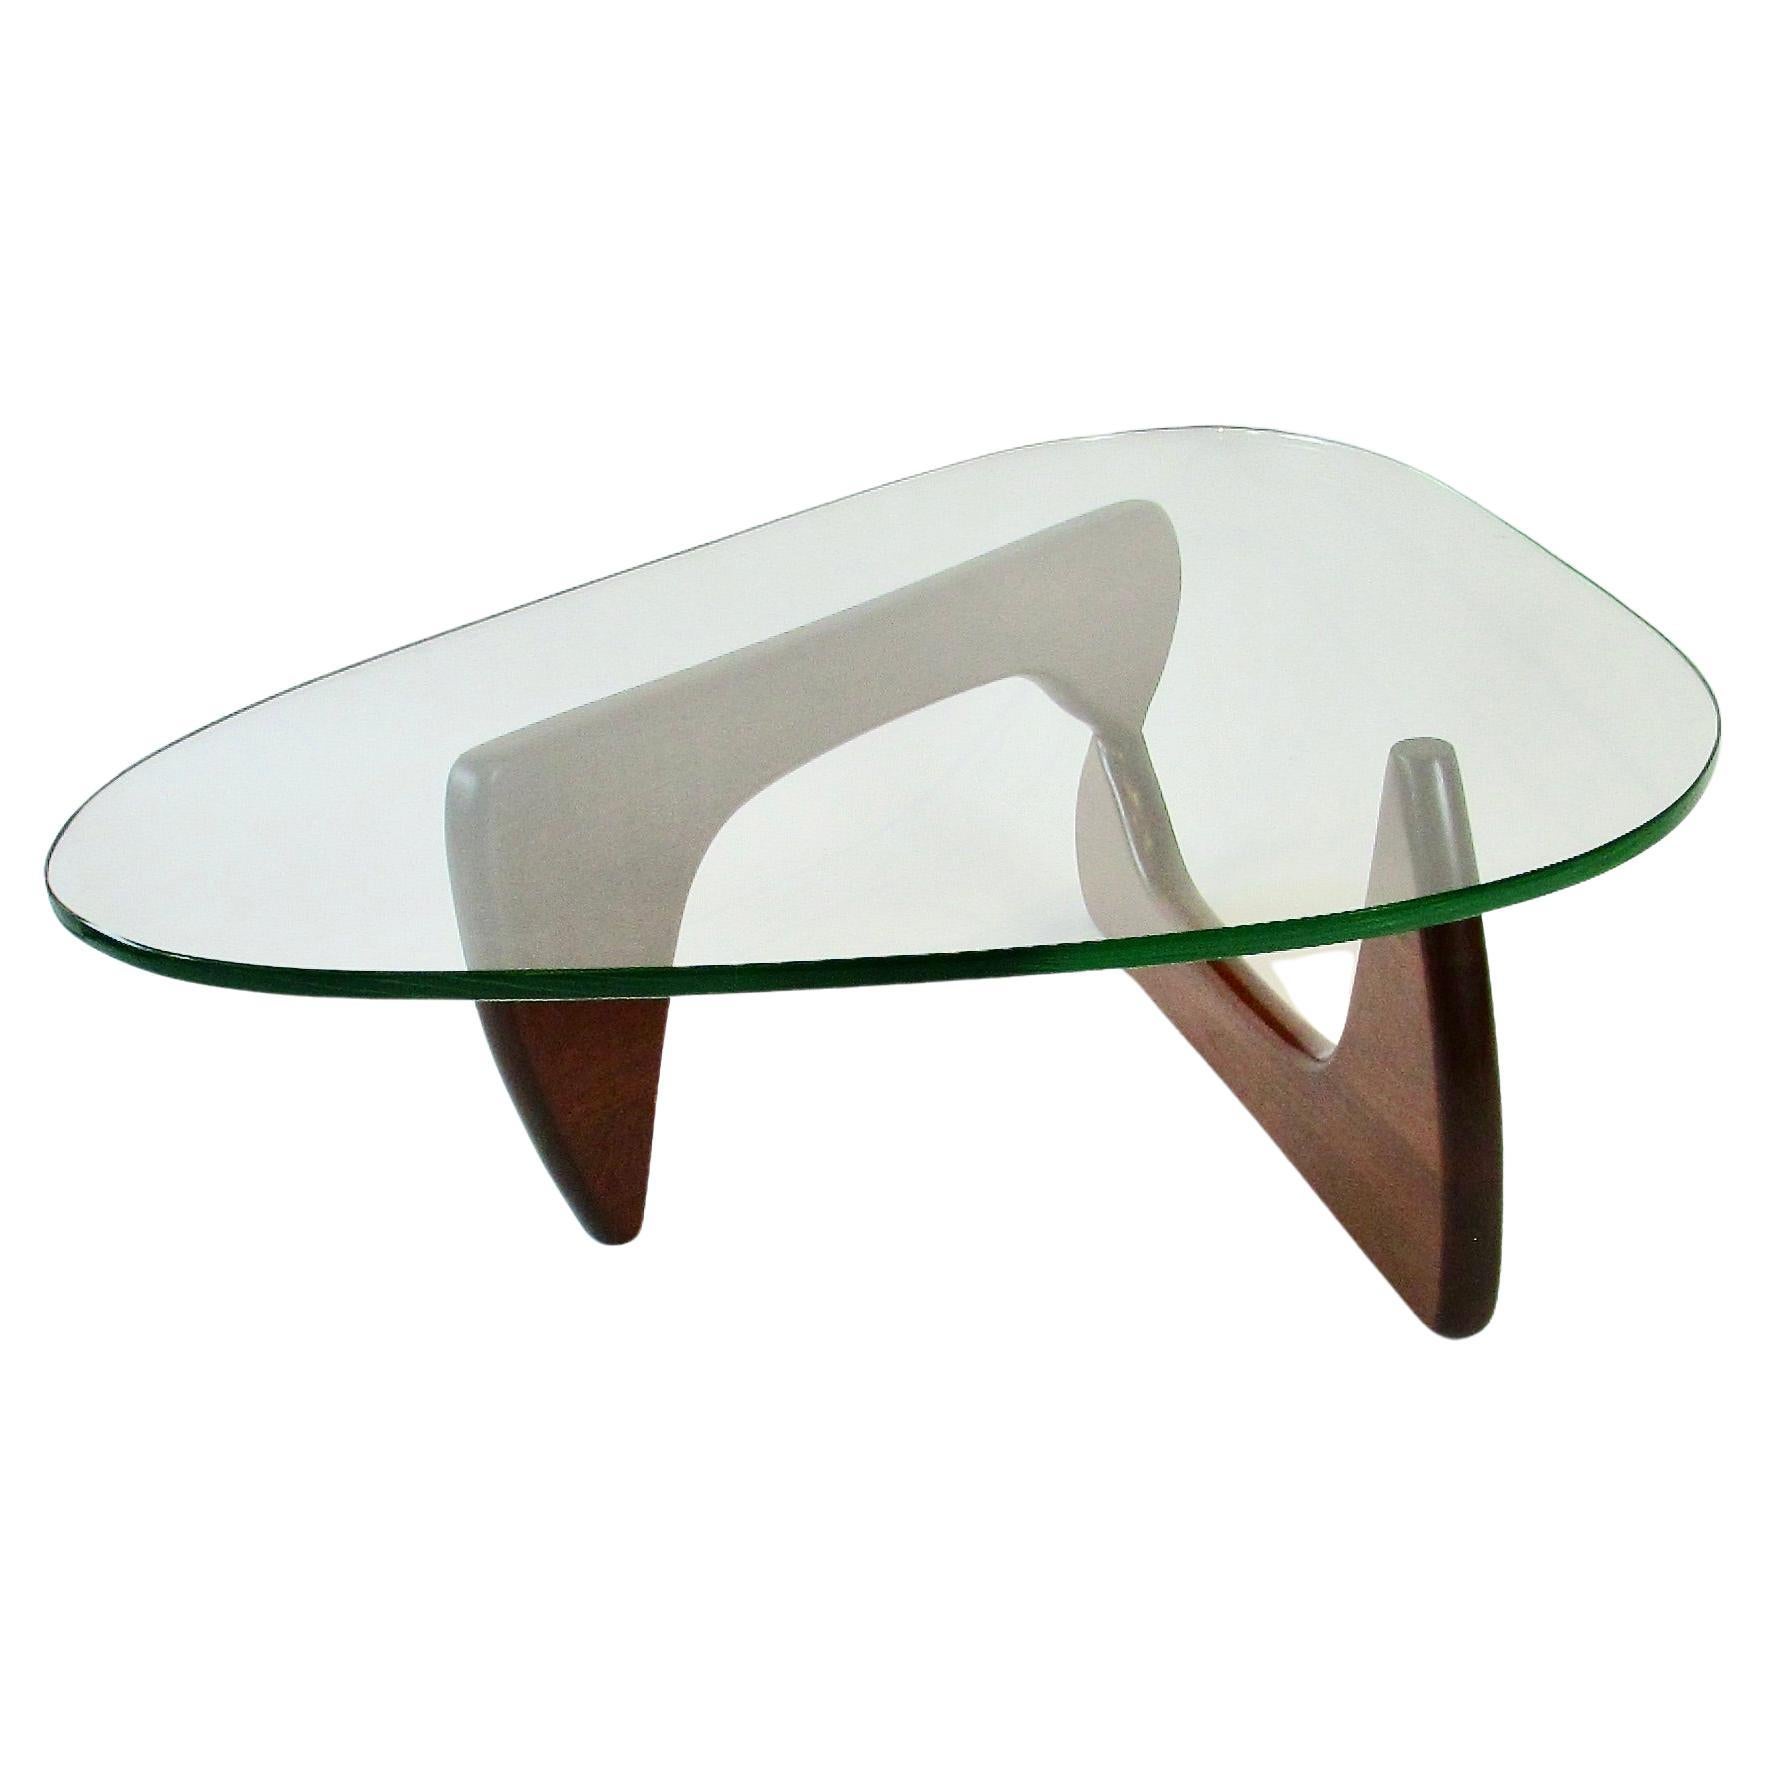 What is the color of the original Noguchi table?